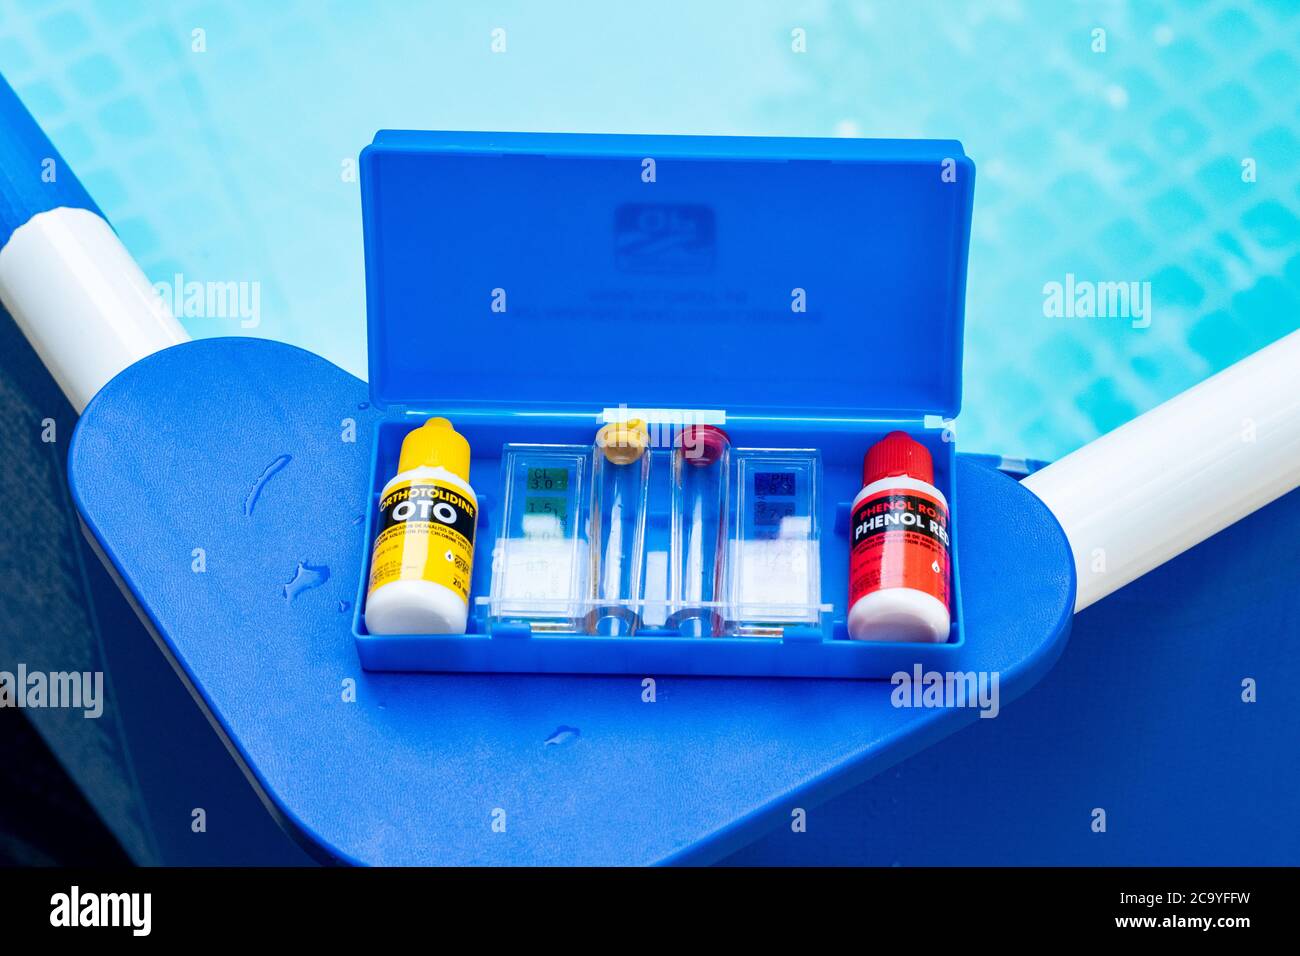 Pool testing kit for water Cloro and ph levels Stock Photo